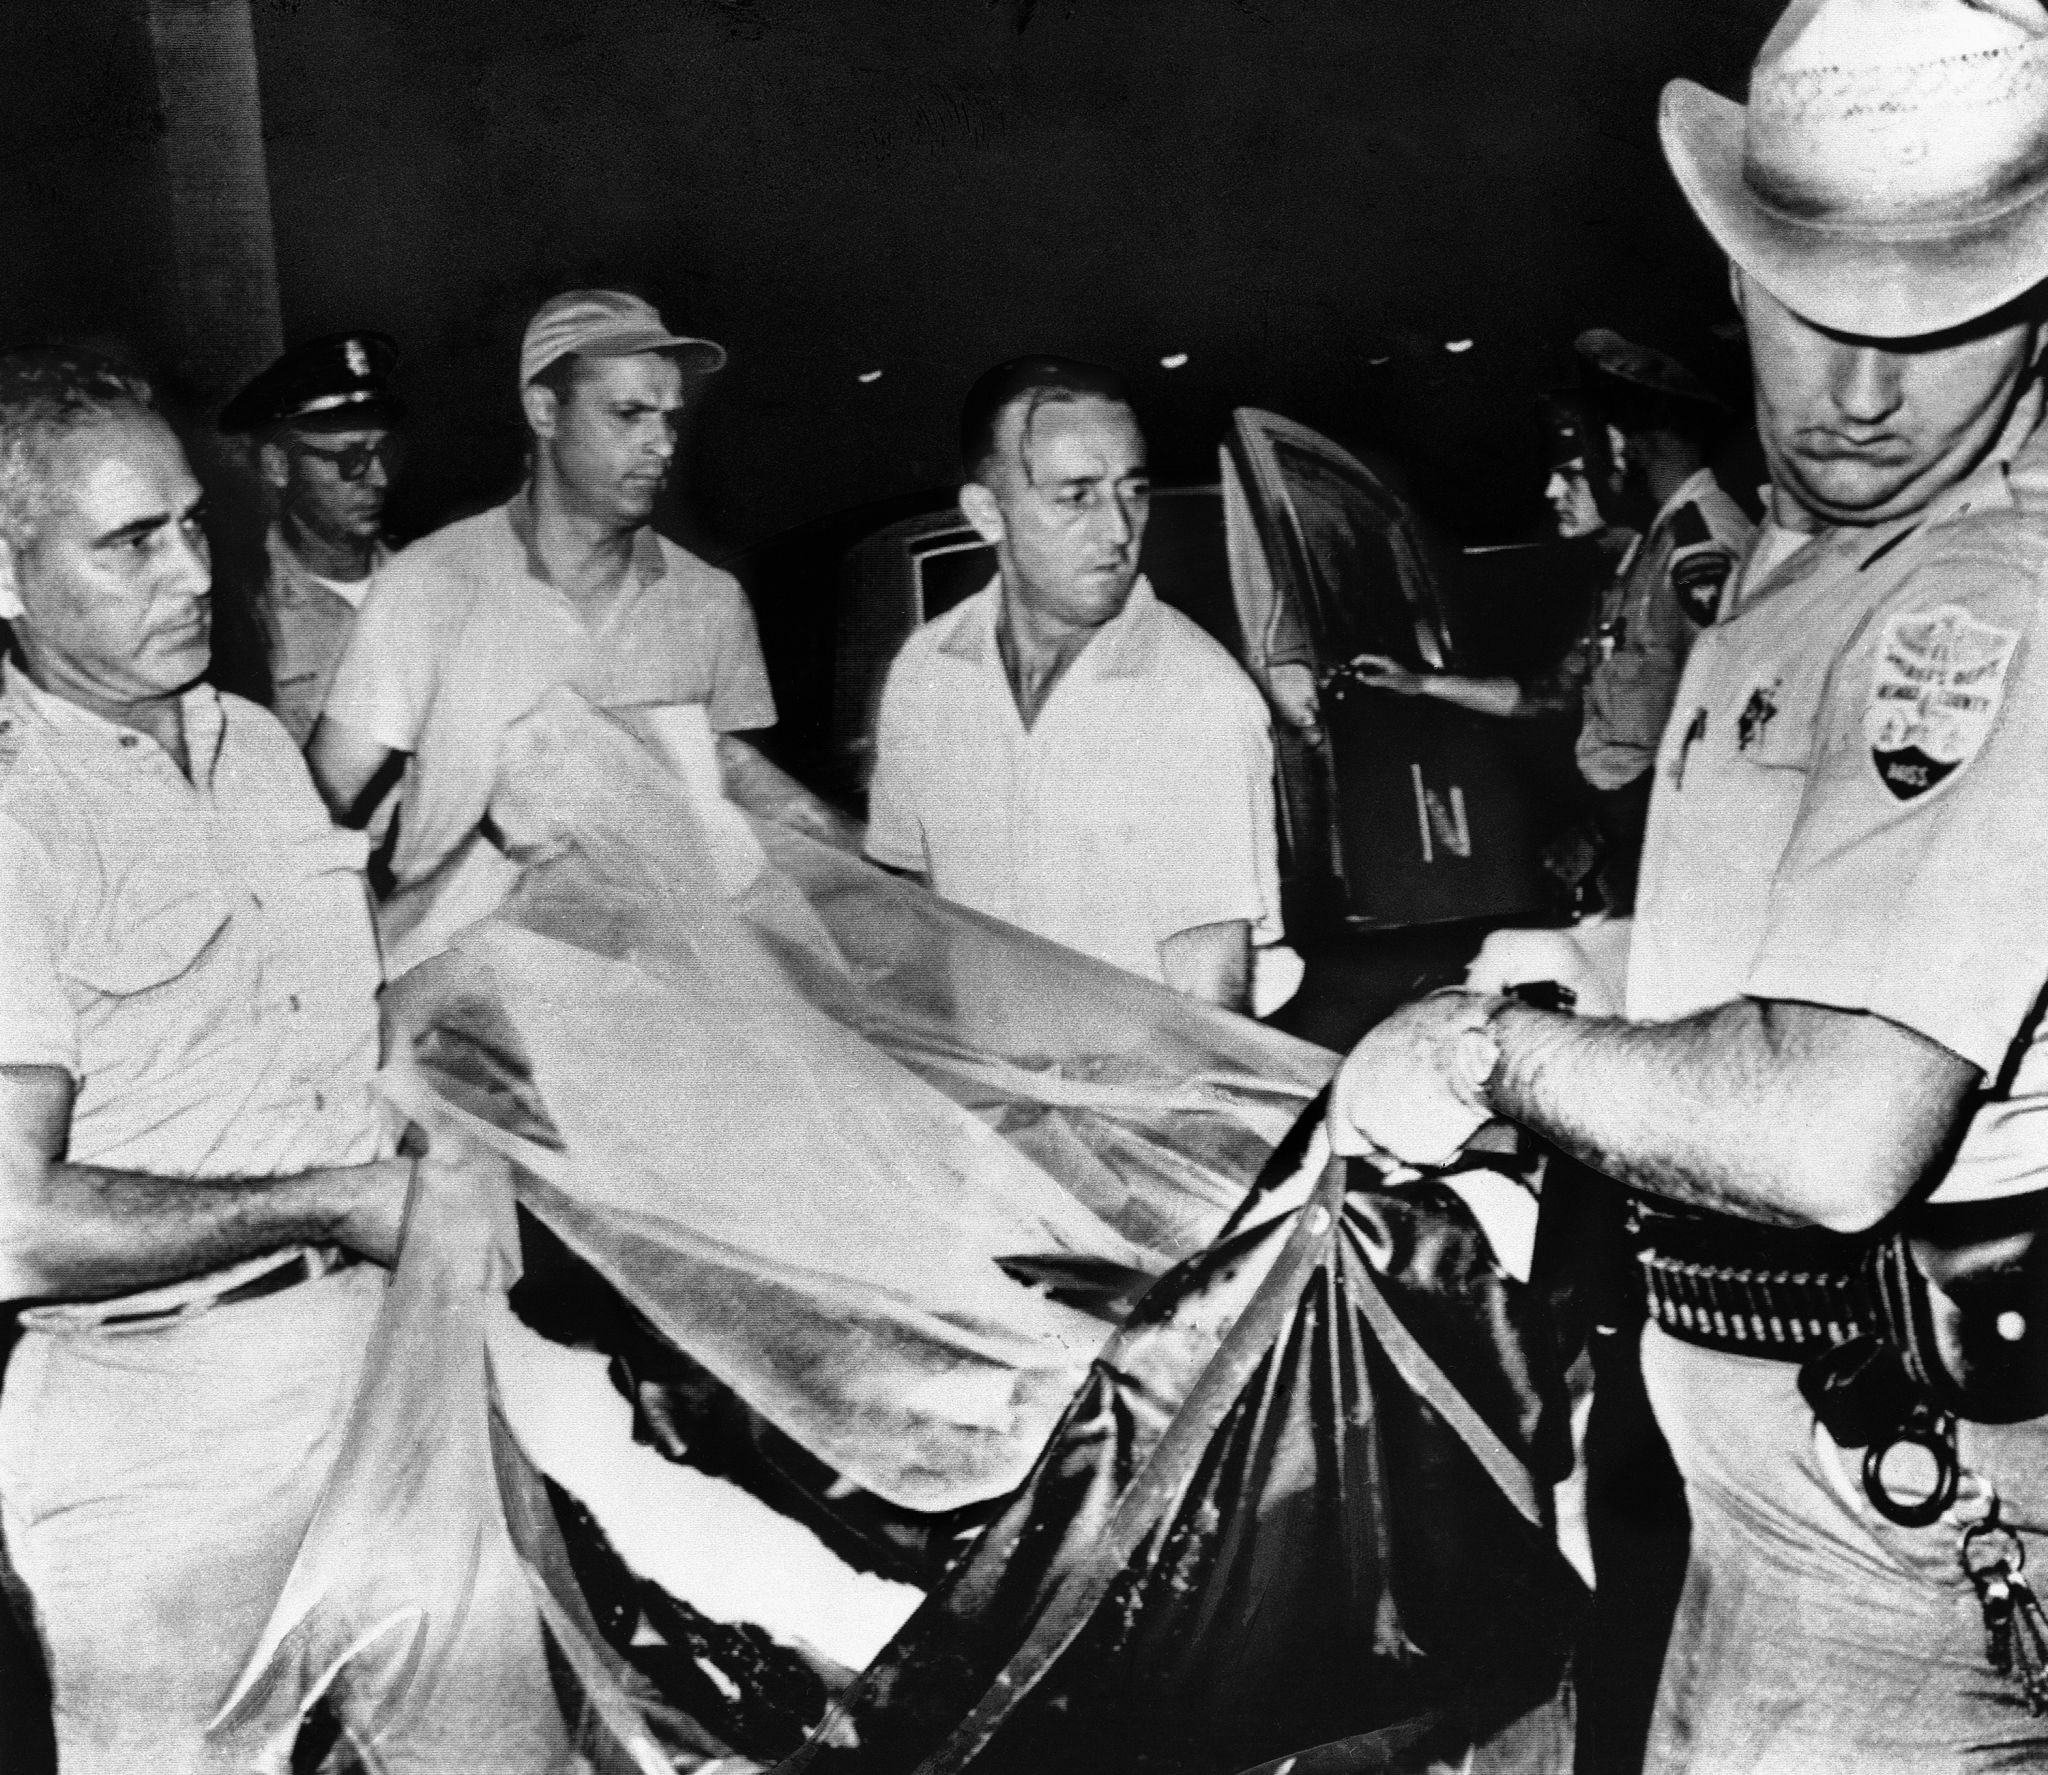 This was the scene last on August 5, 1964 when Neshoba County (Miss.) deputy Sheriff Cecil Price, right, helped unload body of one of three civil rights workers at Jackson, Miss. Bodies earlier that day were found in shallow graves near dam site near Philadelphia, Miss. Price today was one of 21 persons arrested by the FBI in connection with the slayings. (AP Photo)